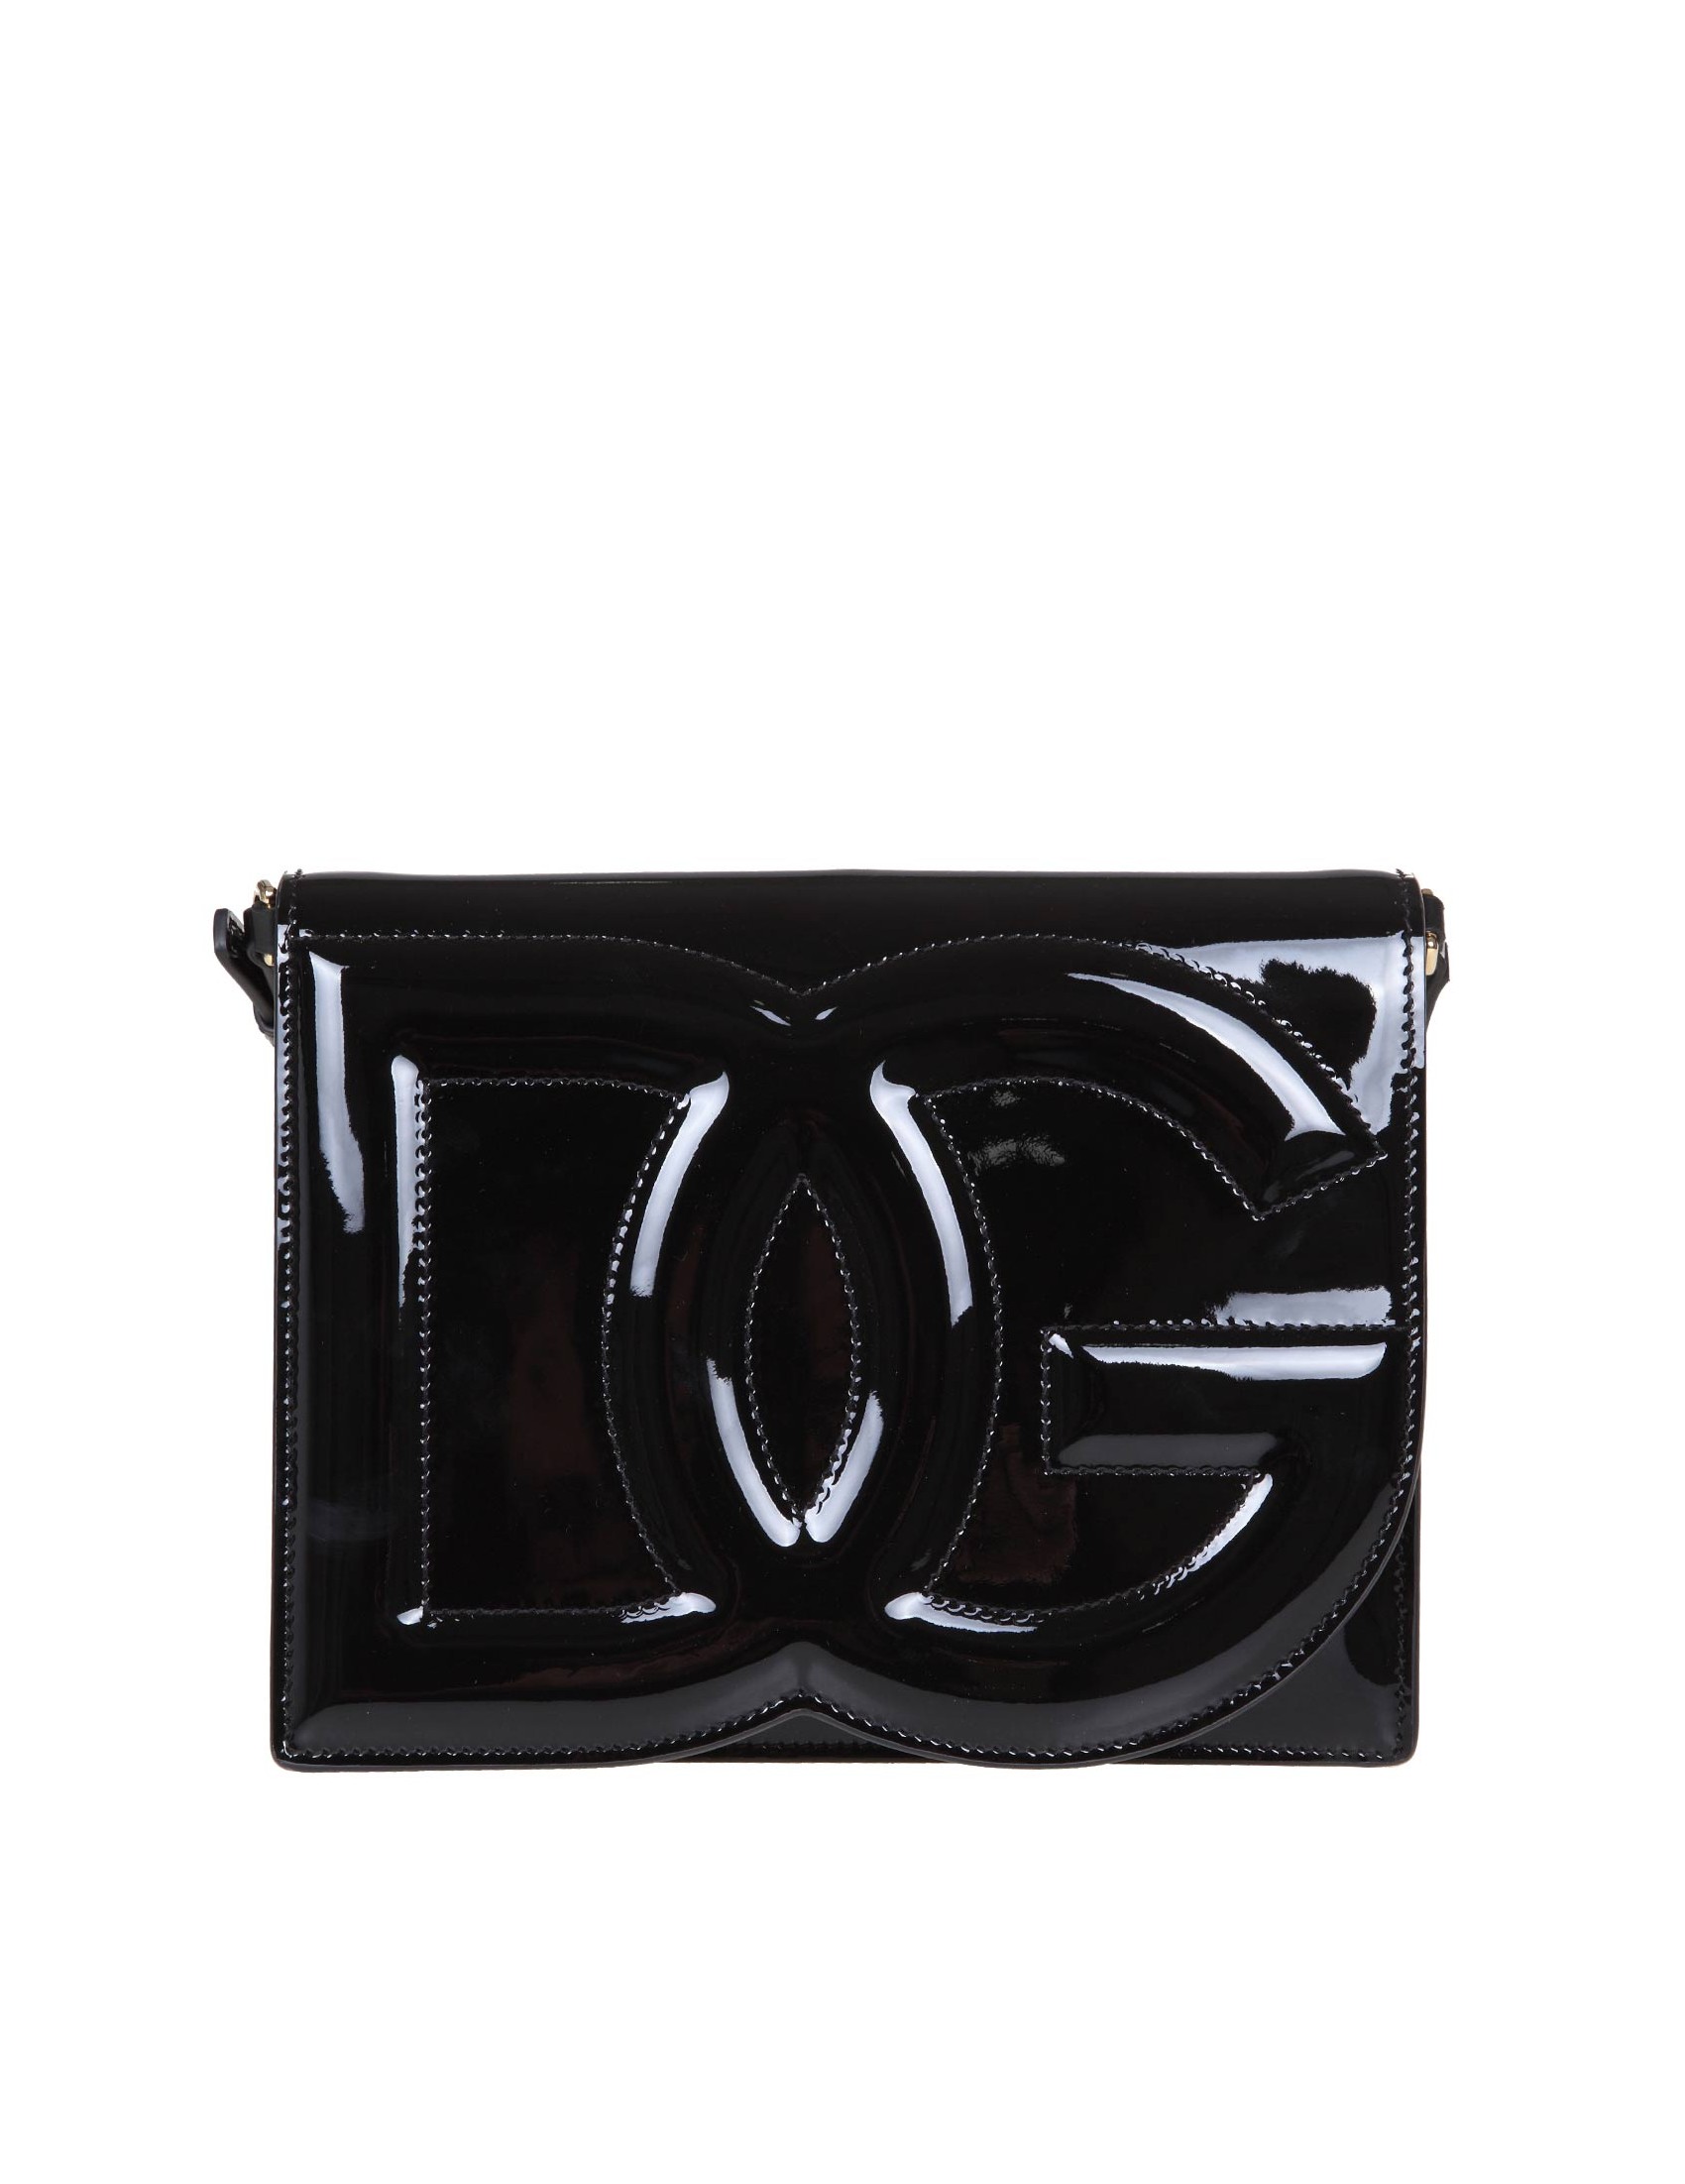 DOLCE & GABBANA PATENT LEATHER CROSSBODY BAG WITH LOGO